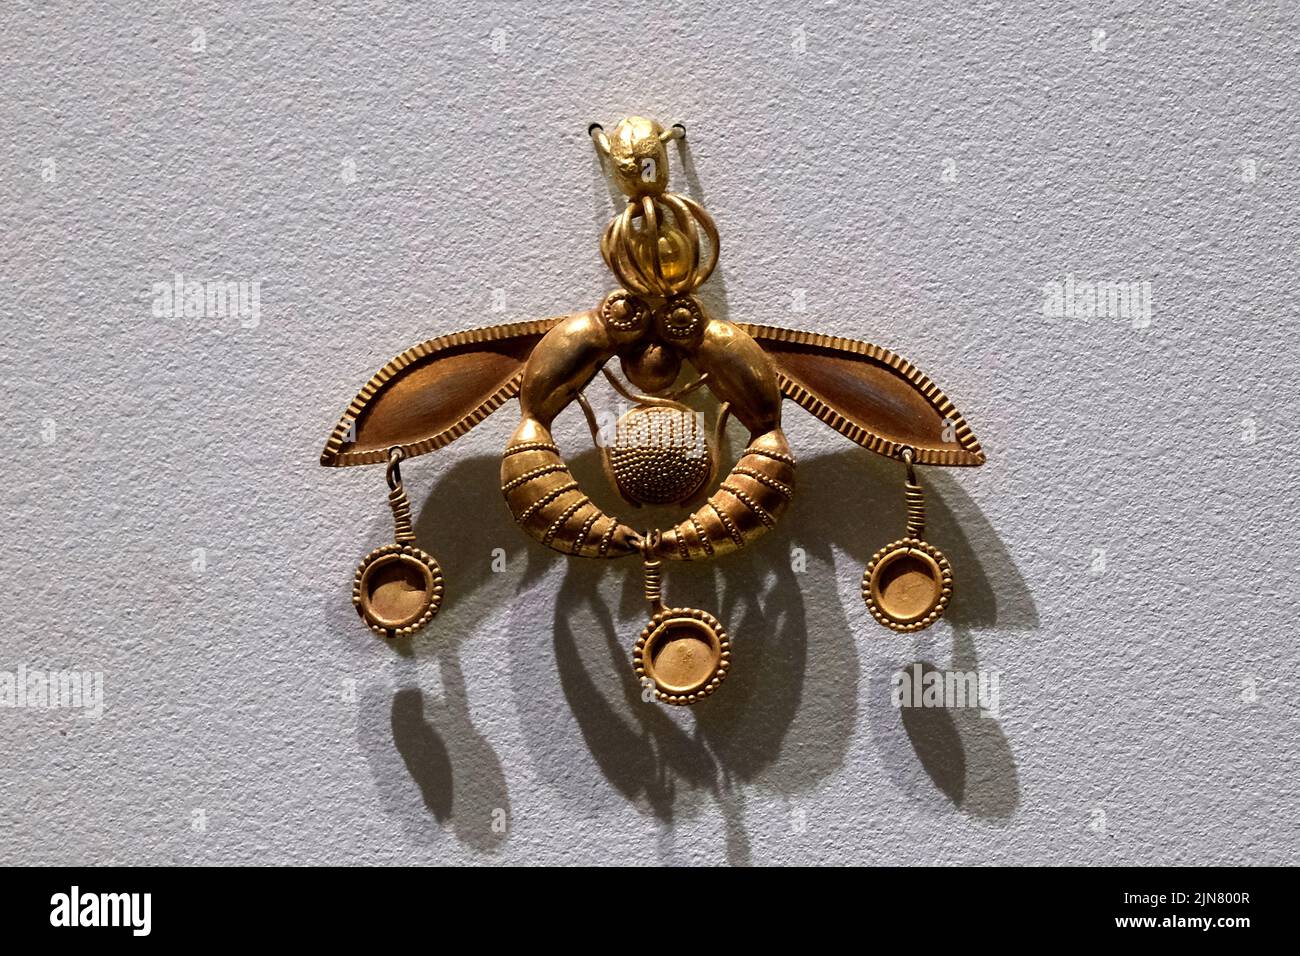 The Bee Pendant, a gold ornament in the Heraklion Archaeological Museum in Crete Greece Stock Photo